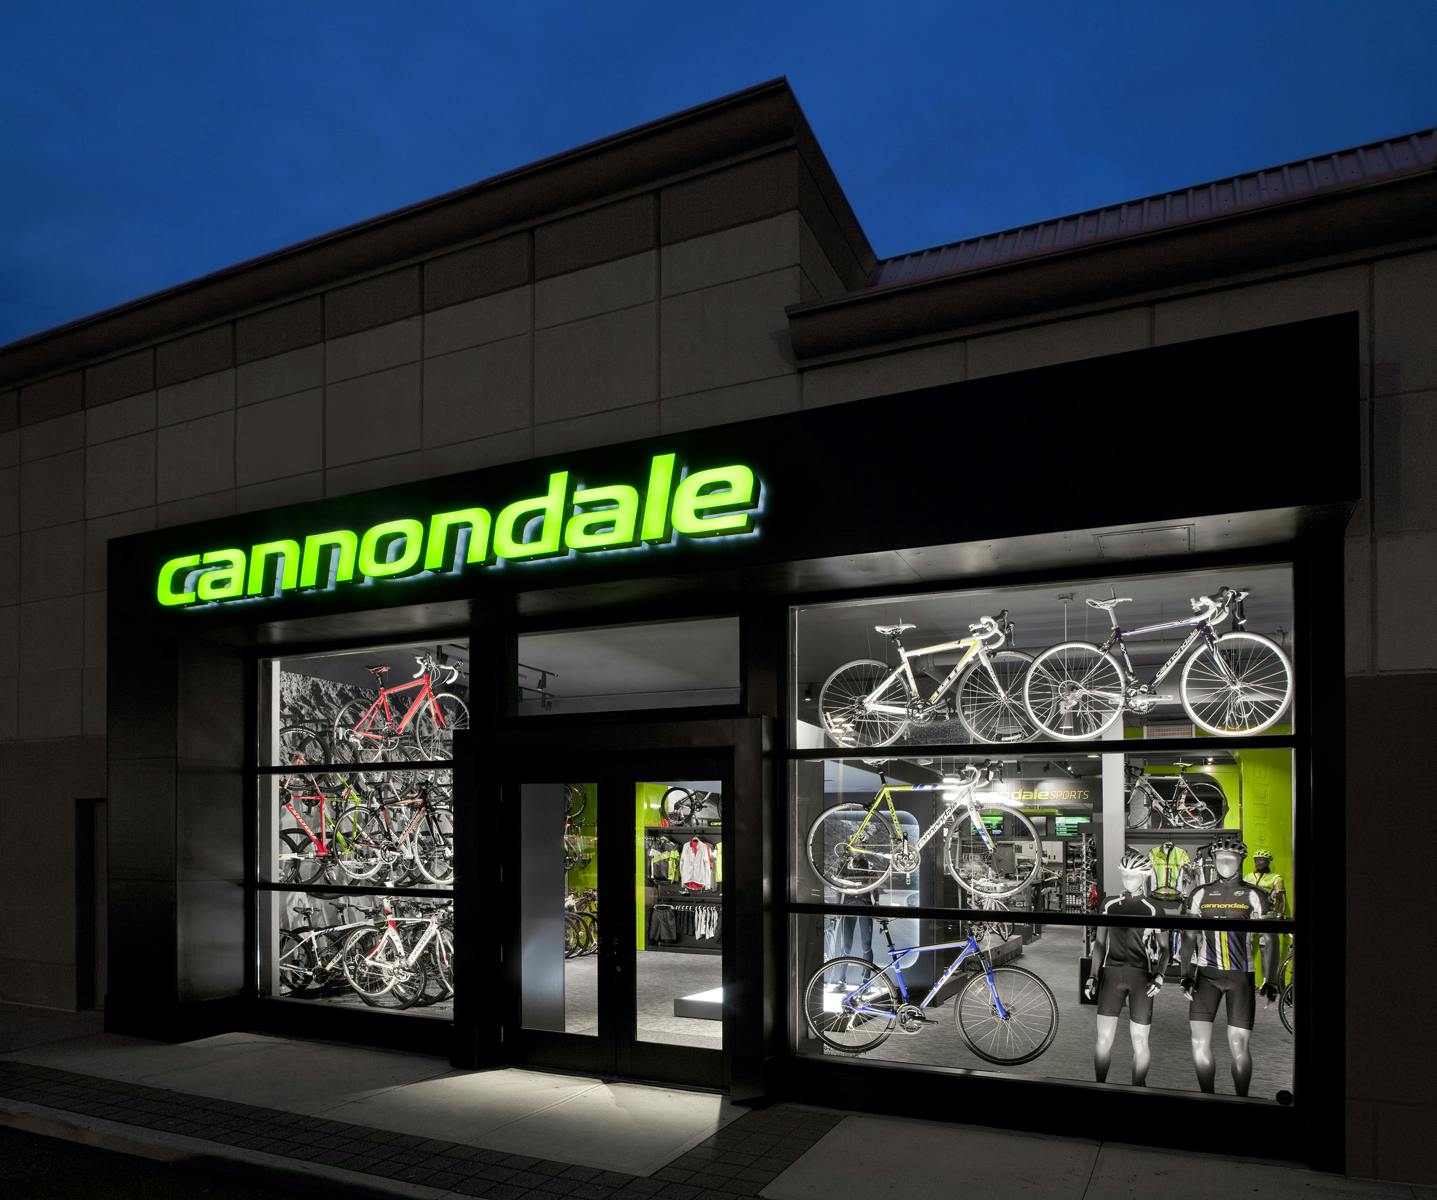 Cannondale wins at Chain Store Age Awards